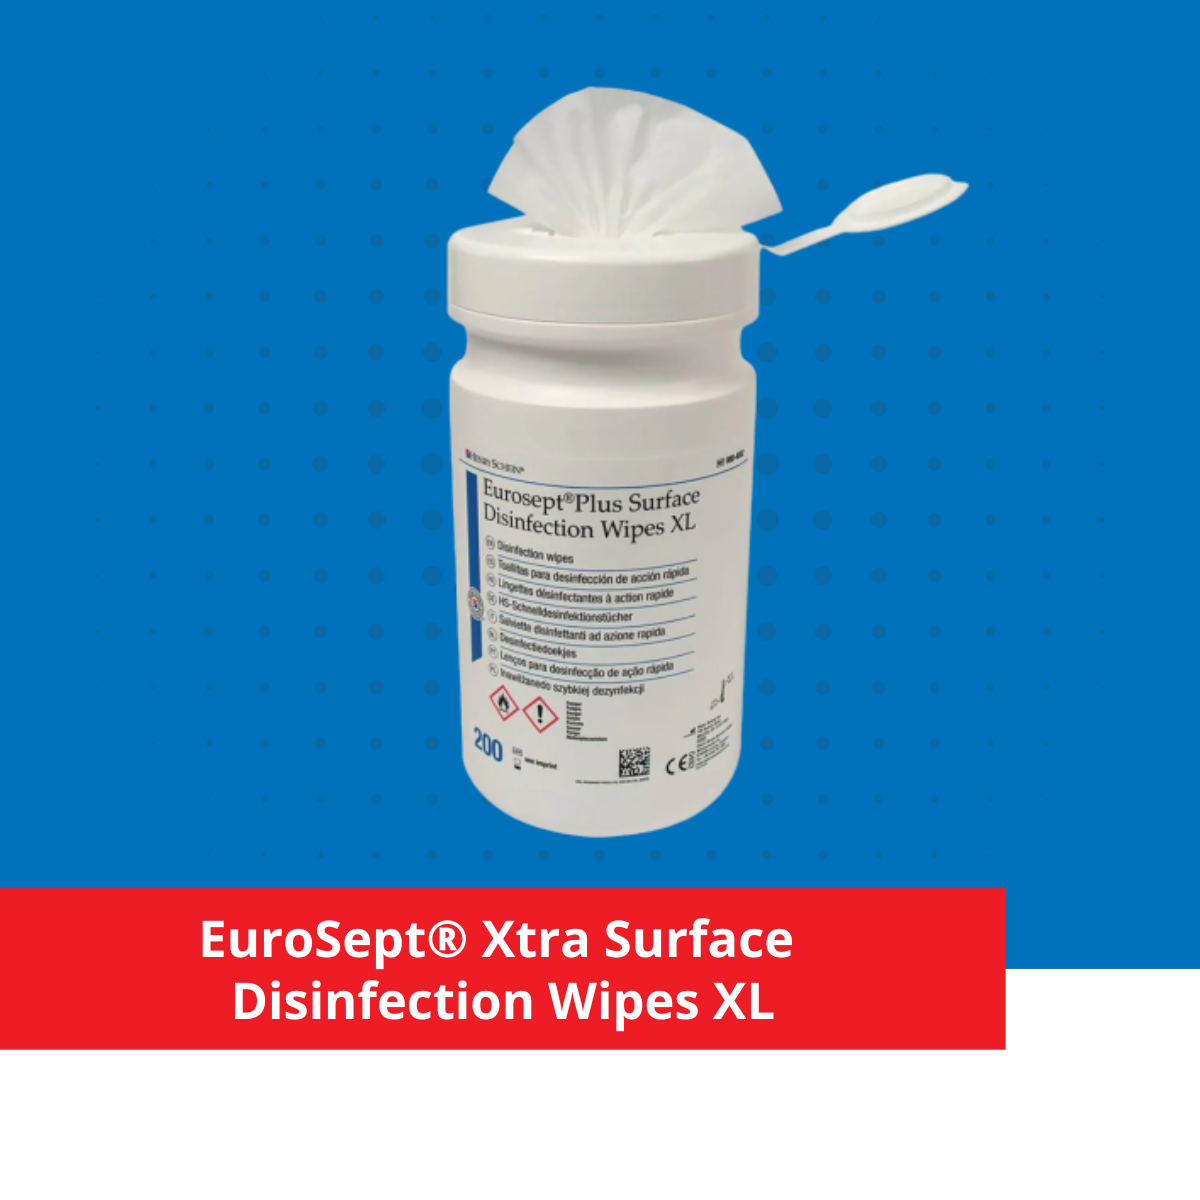 EuroSept Xtra Surface Disinfection Wipes XL